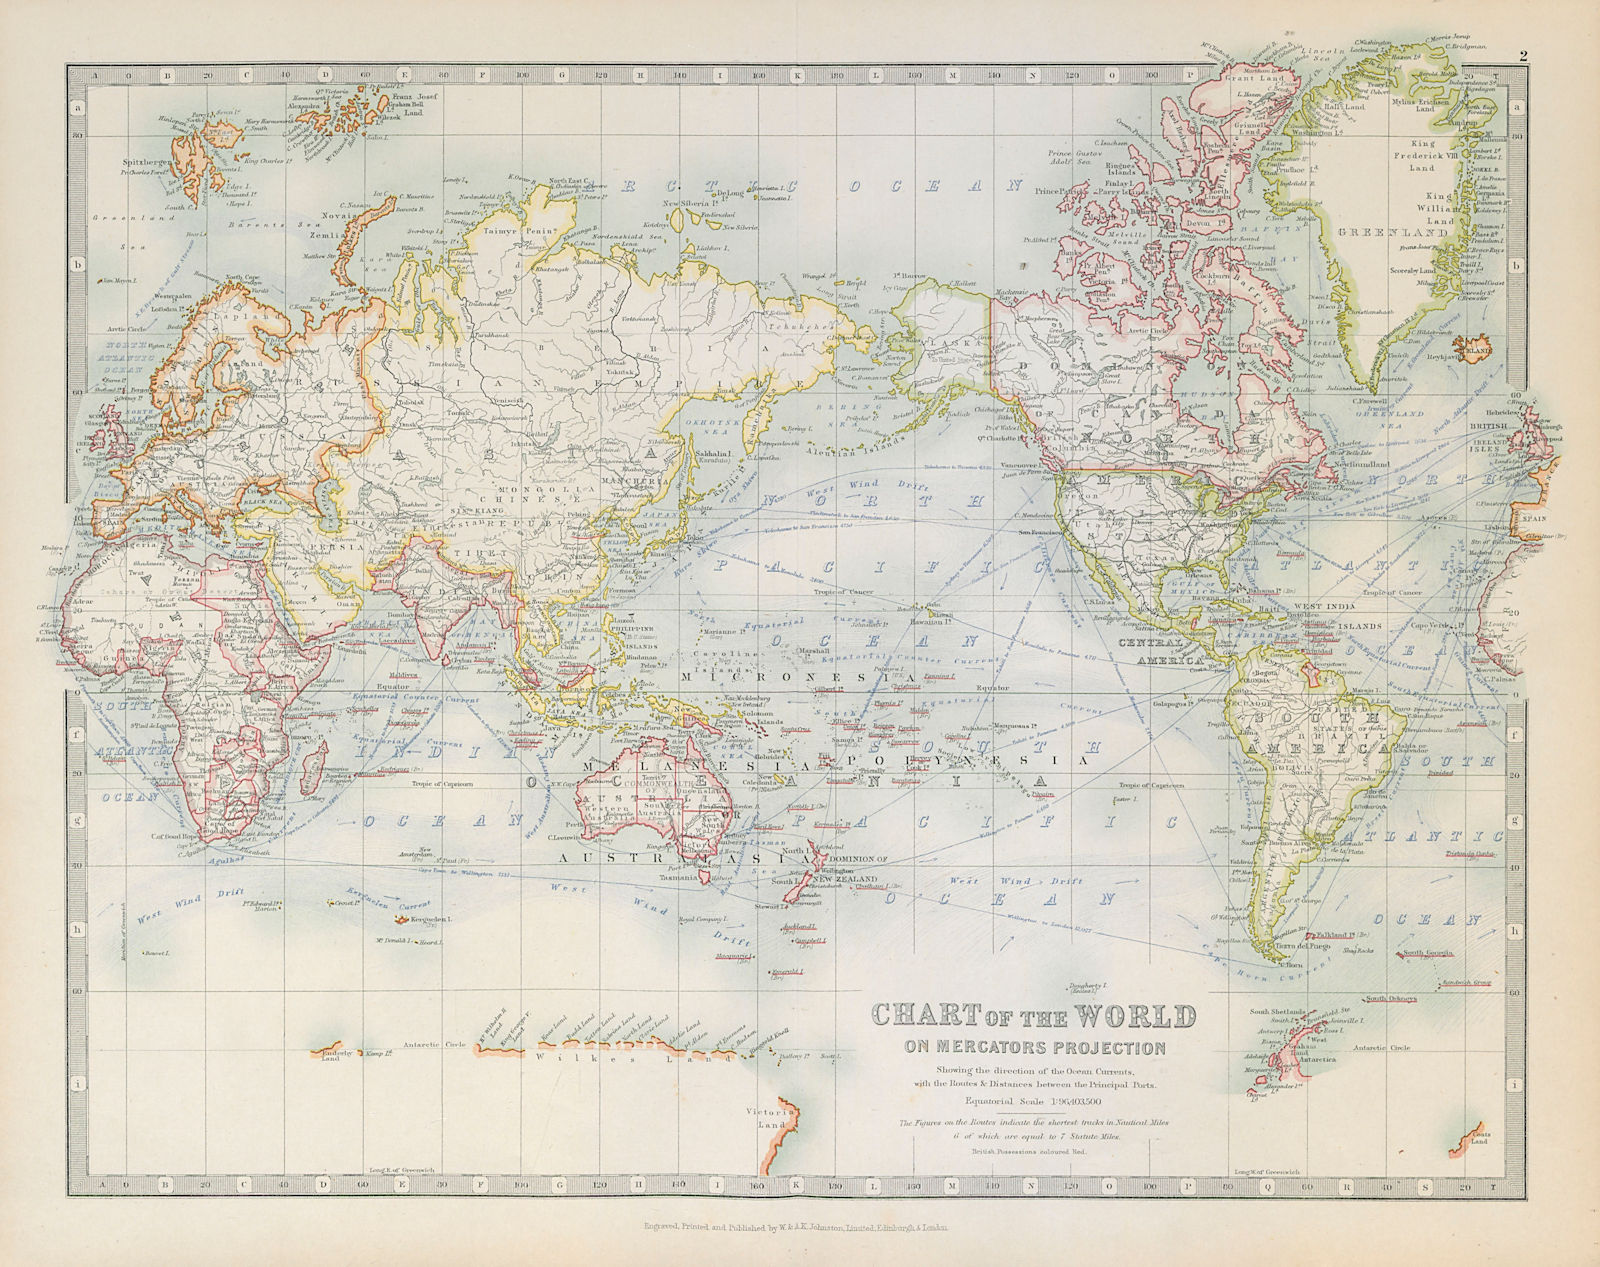 Associate Product WORLD ON MERCATOR'S PROJECTION unusually Pacific-centred. JOHNSTON 1915 map